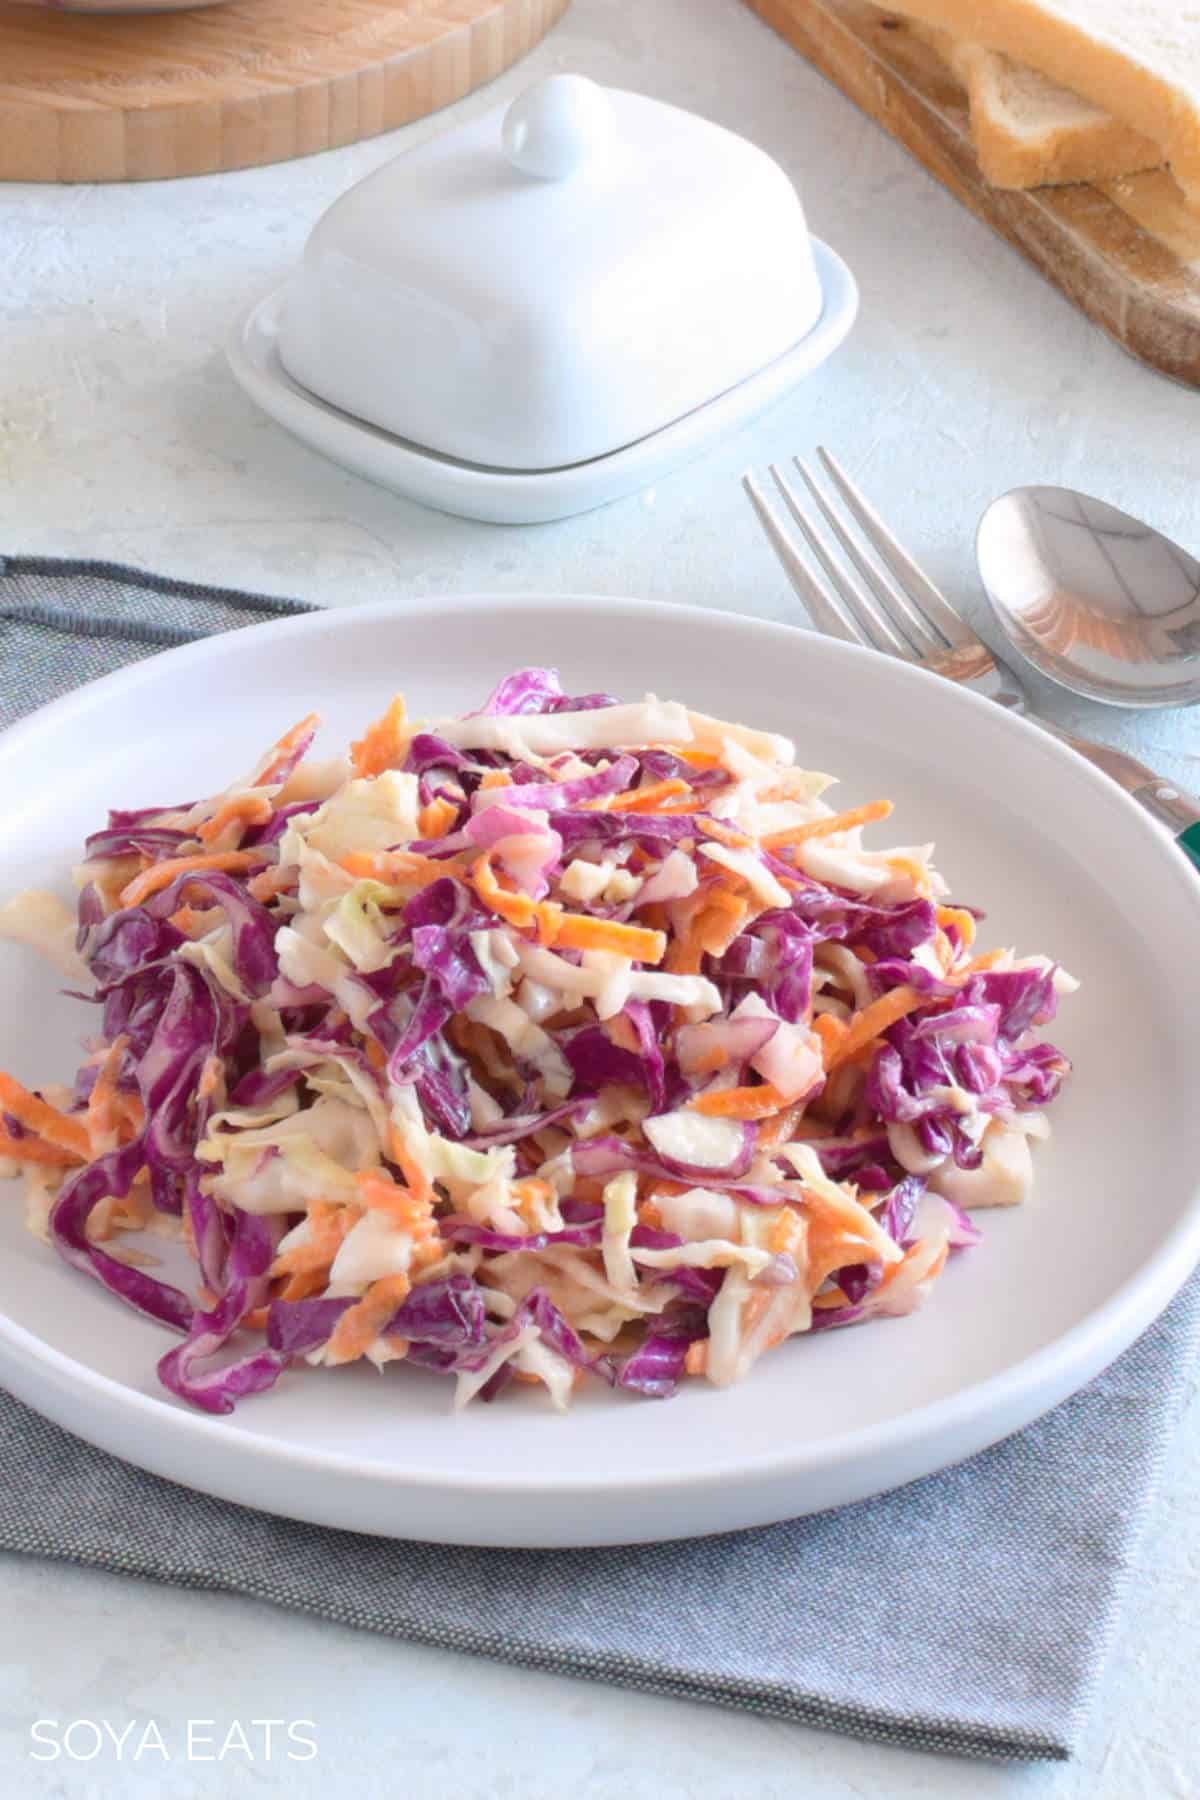 Coleslaw on a white plate and grey napkin.